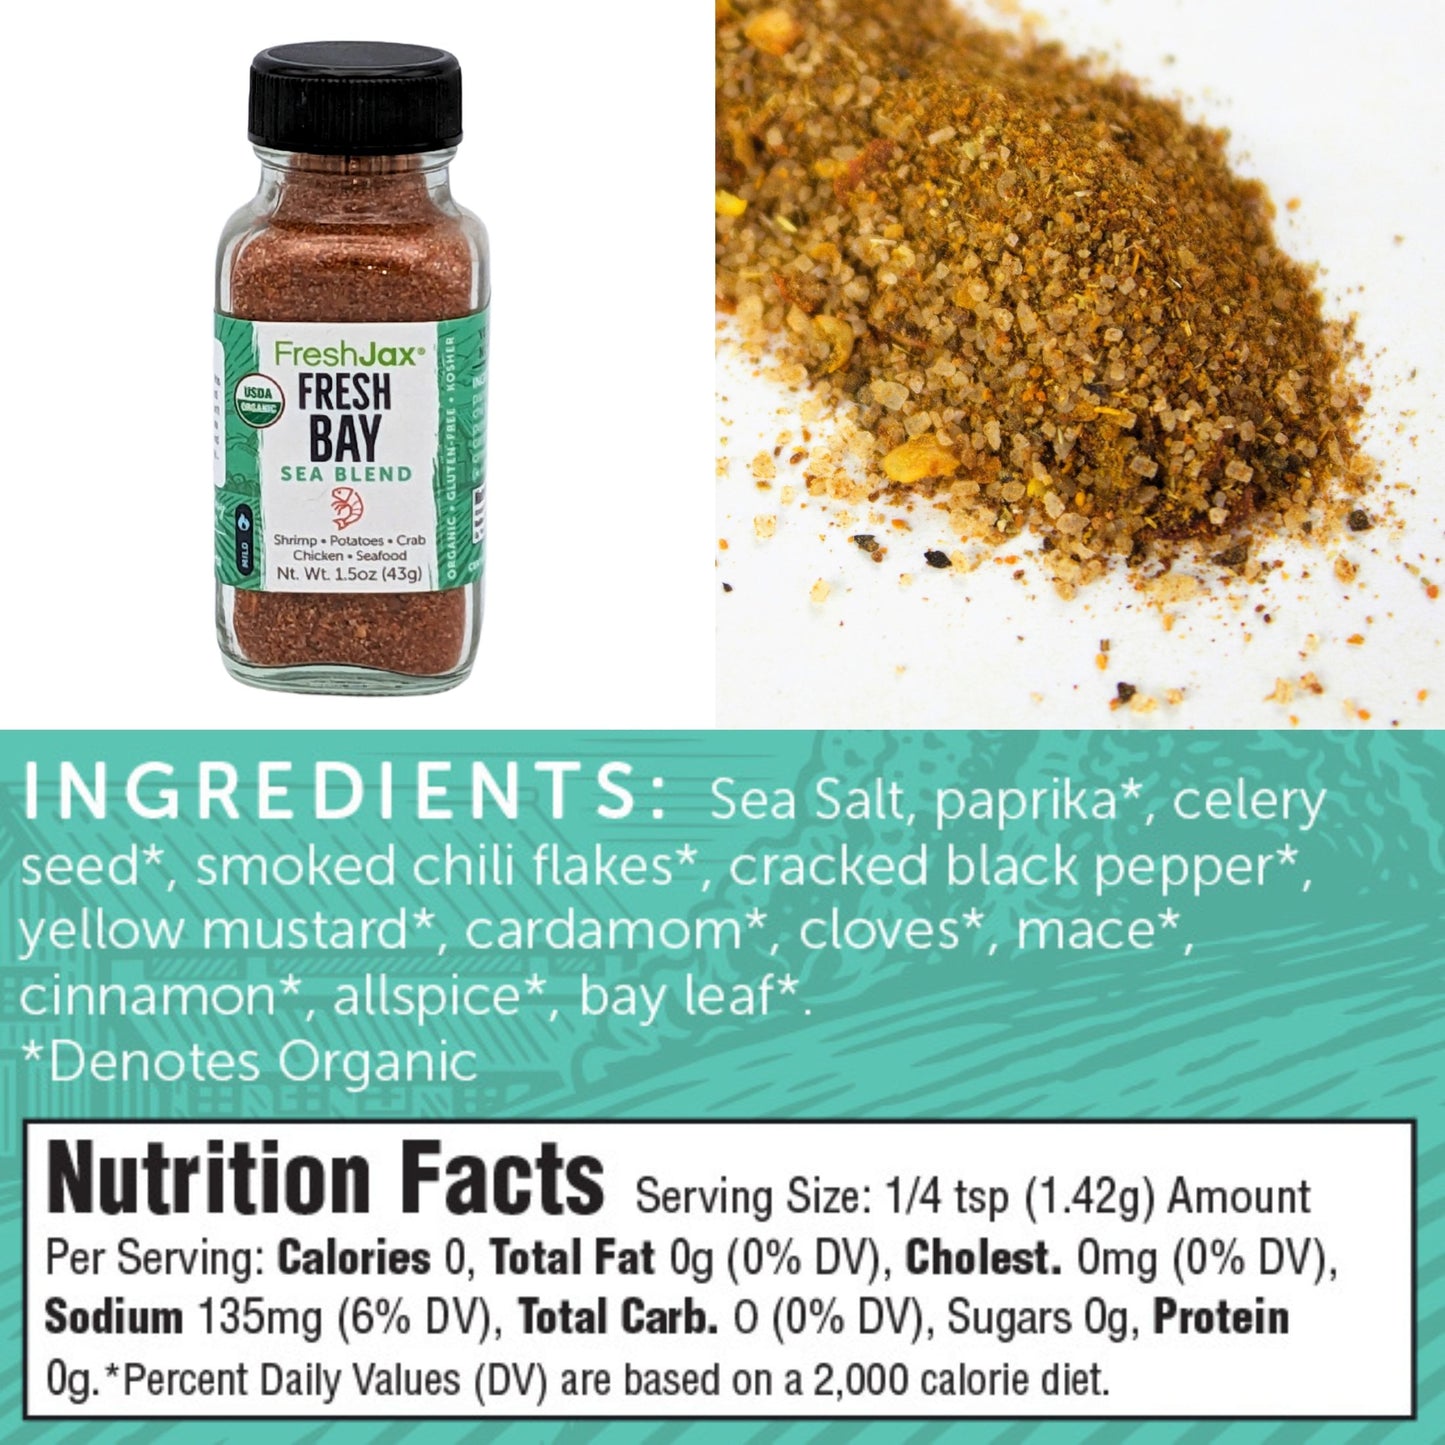 FreshJax Organic Spices Fresh Bay Sea Blend Ingredients and Nutritional Information